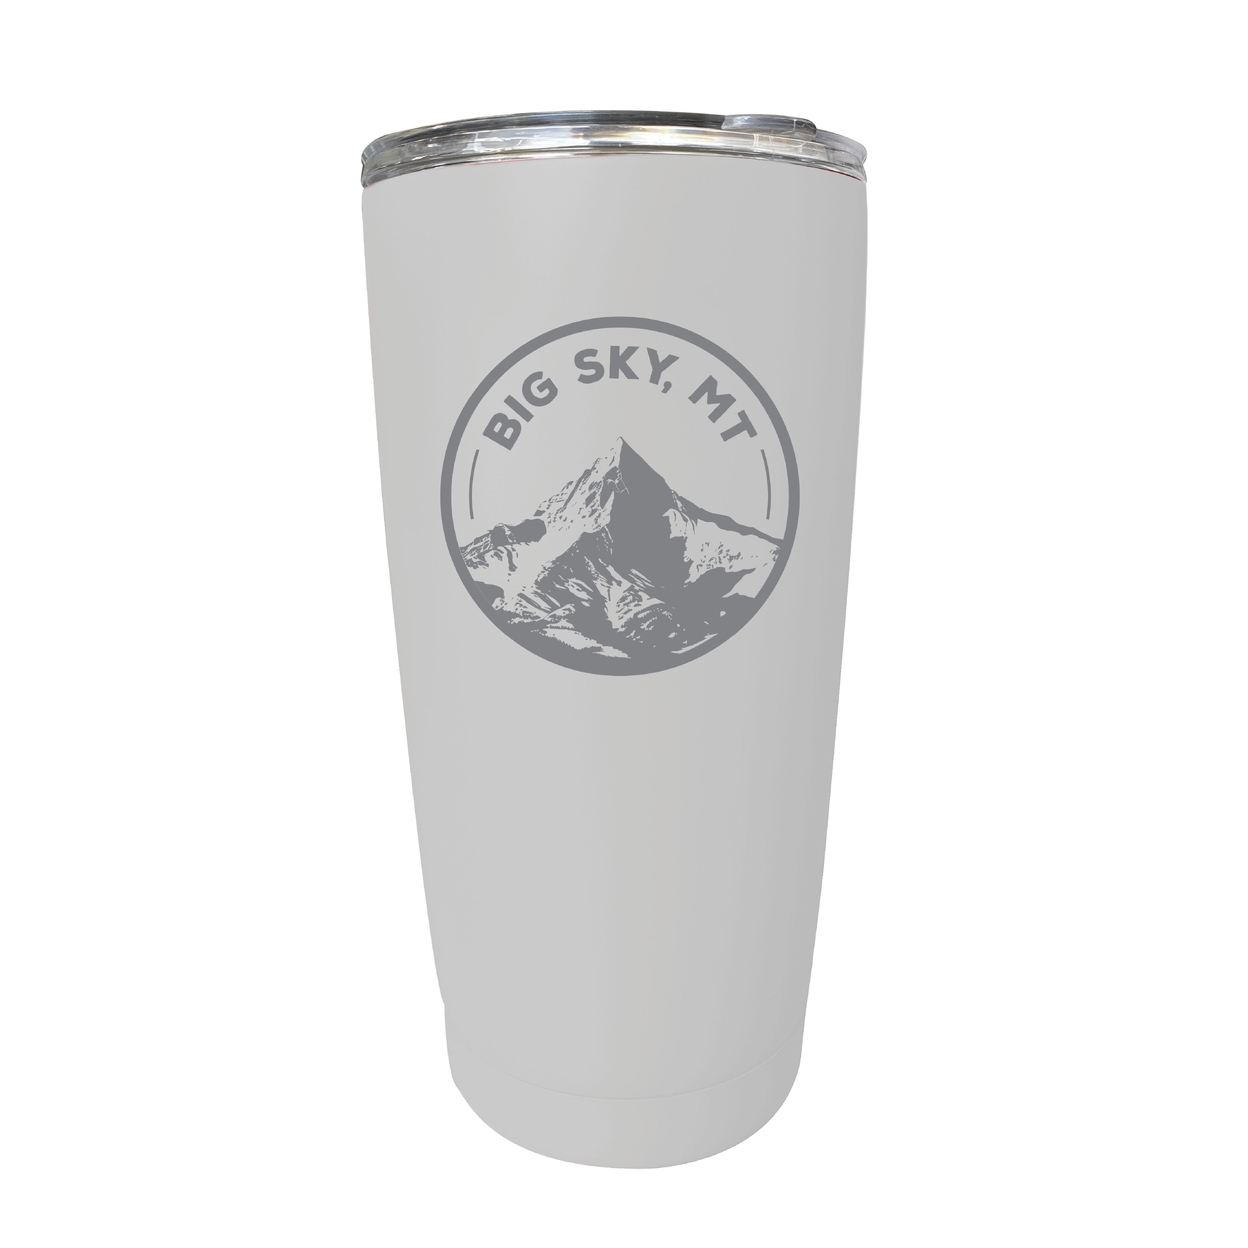 Big Sky Montana Souvenir 16 Oz Engraved Stainless Steel Insulated Tumbler - Red,,Single Unit